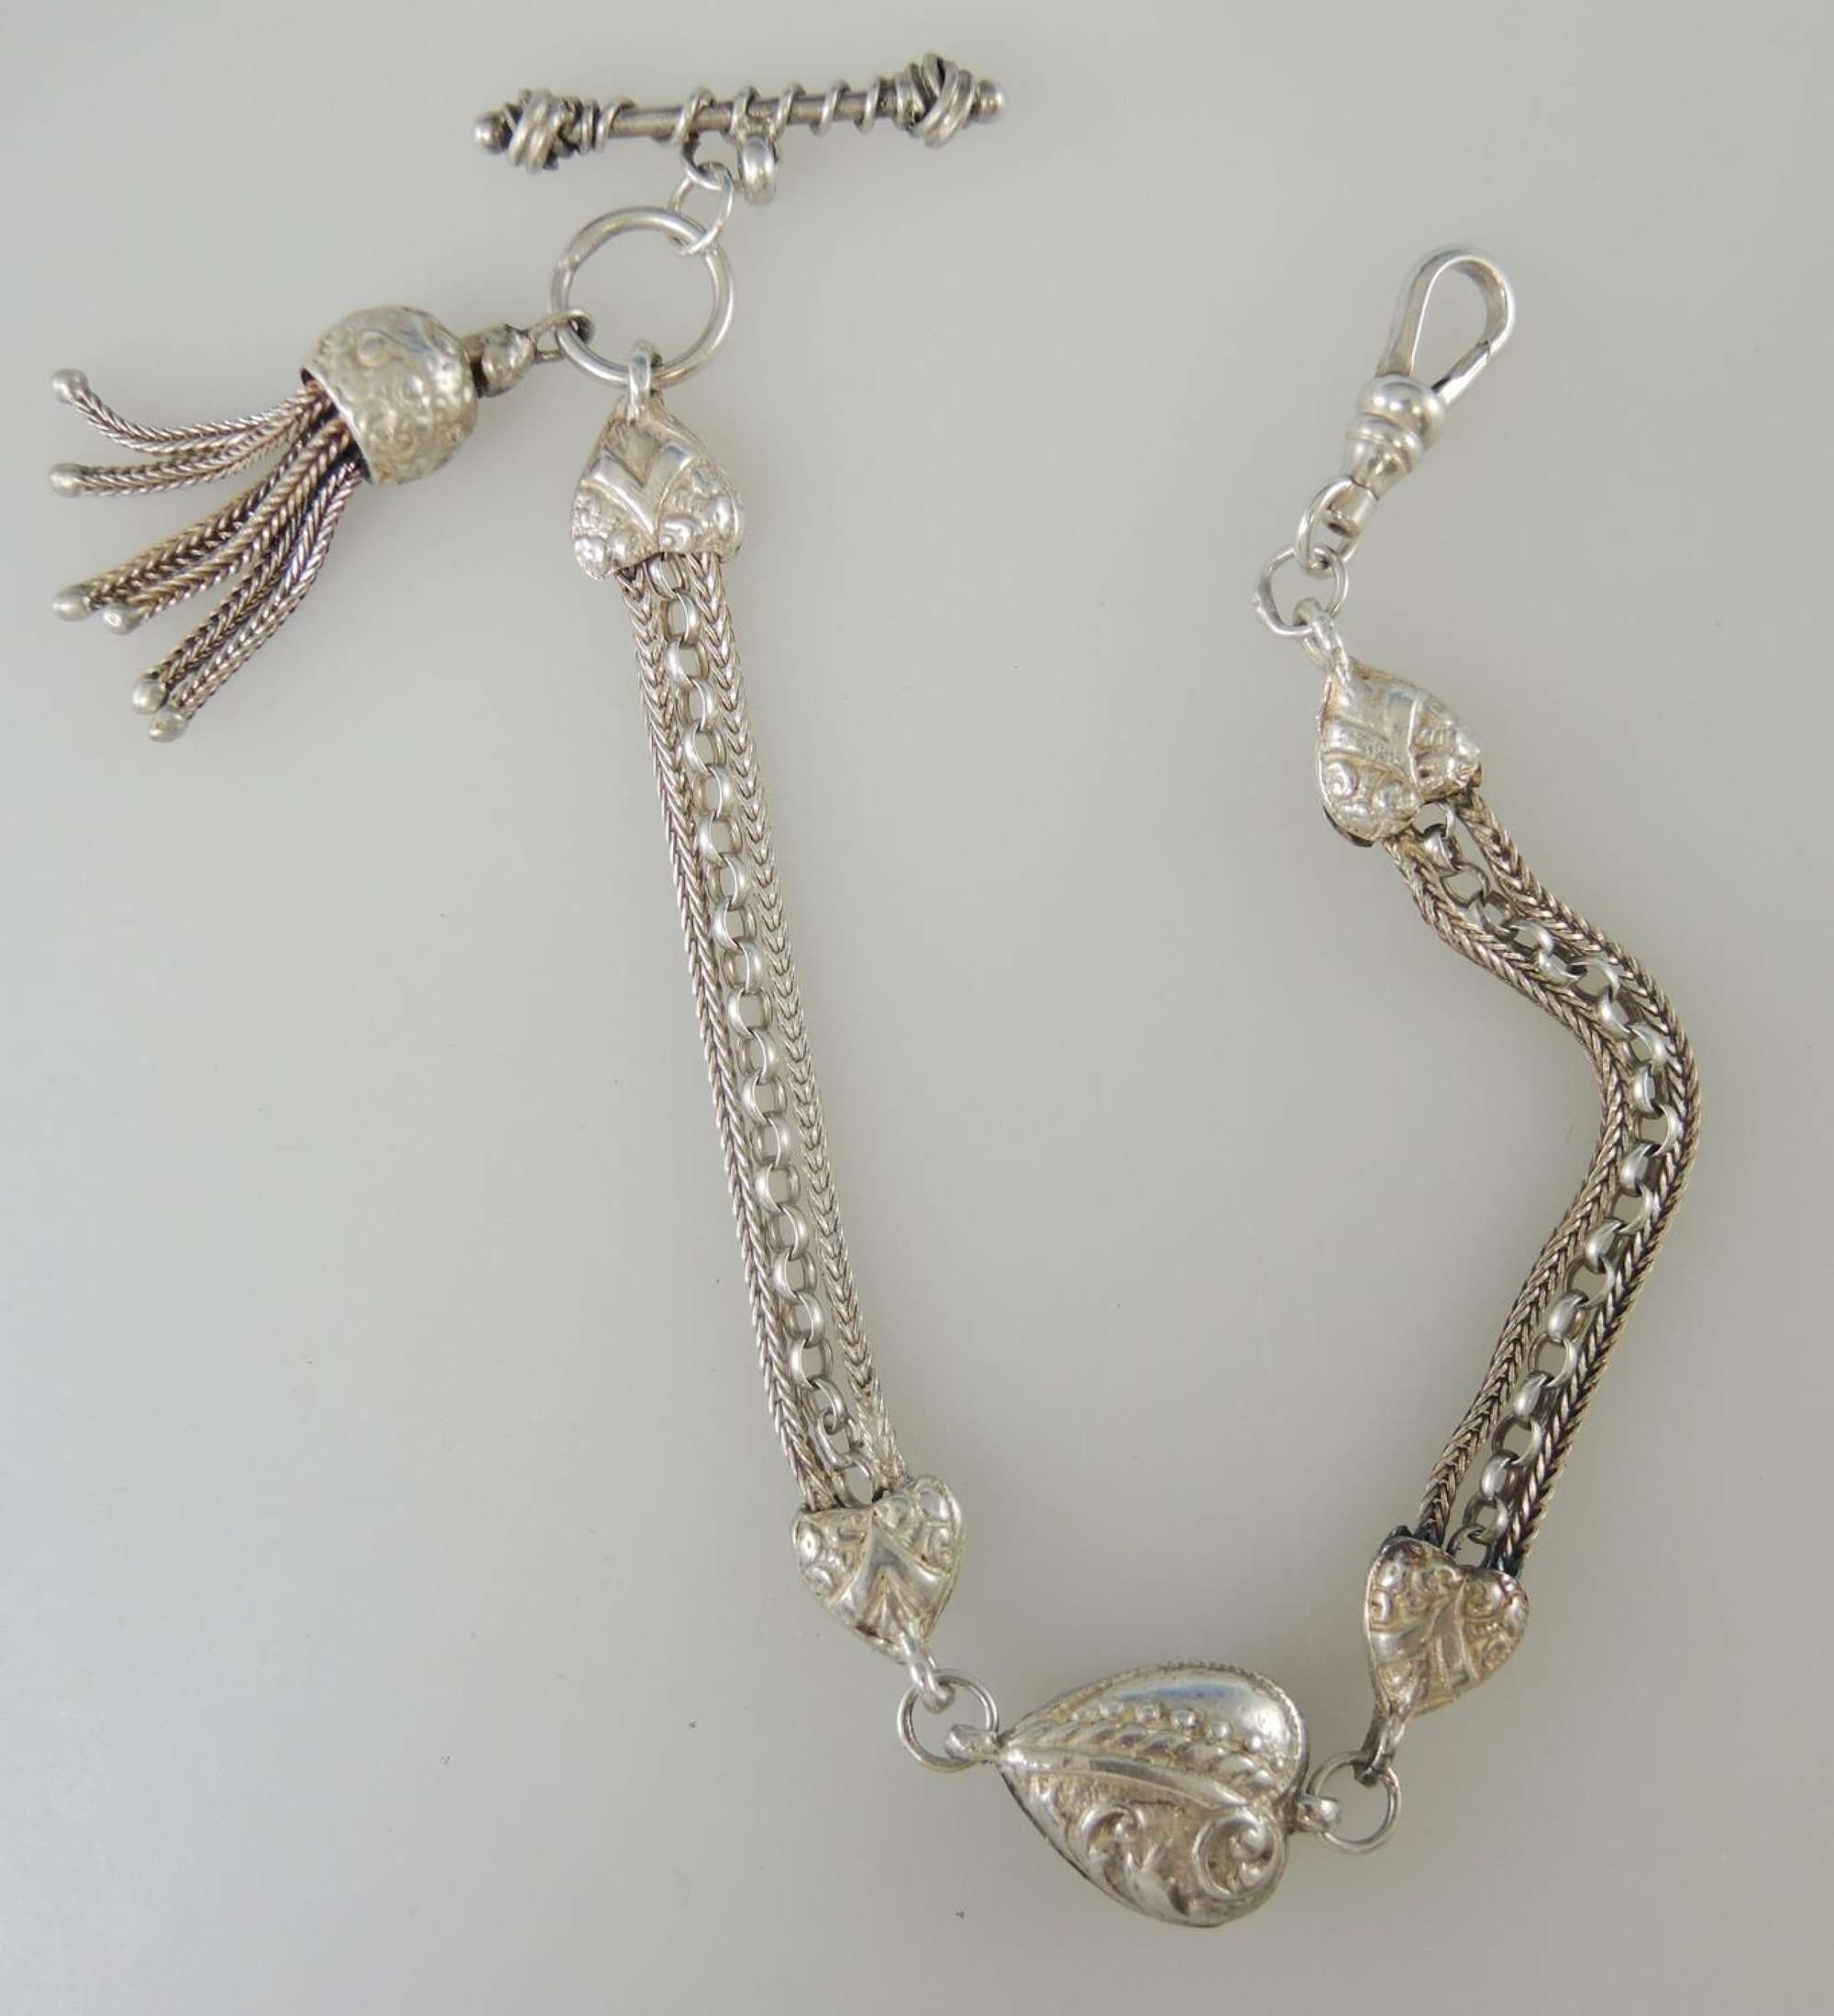 Silver Fancy Albertina with Heart shaped Links. Circa 1890